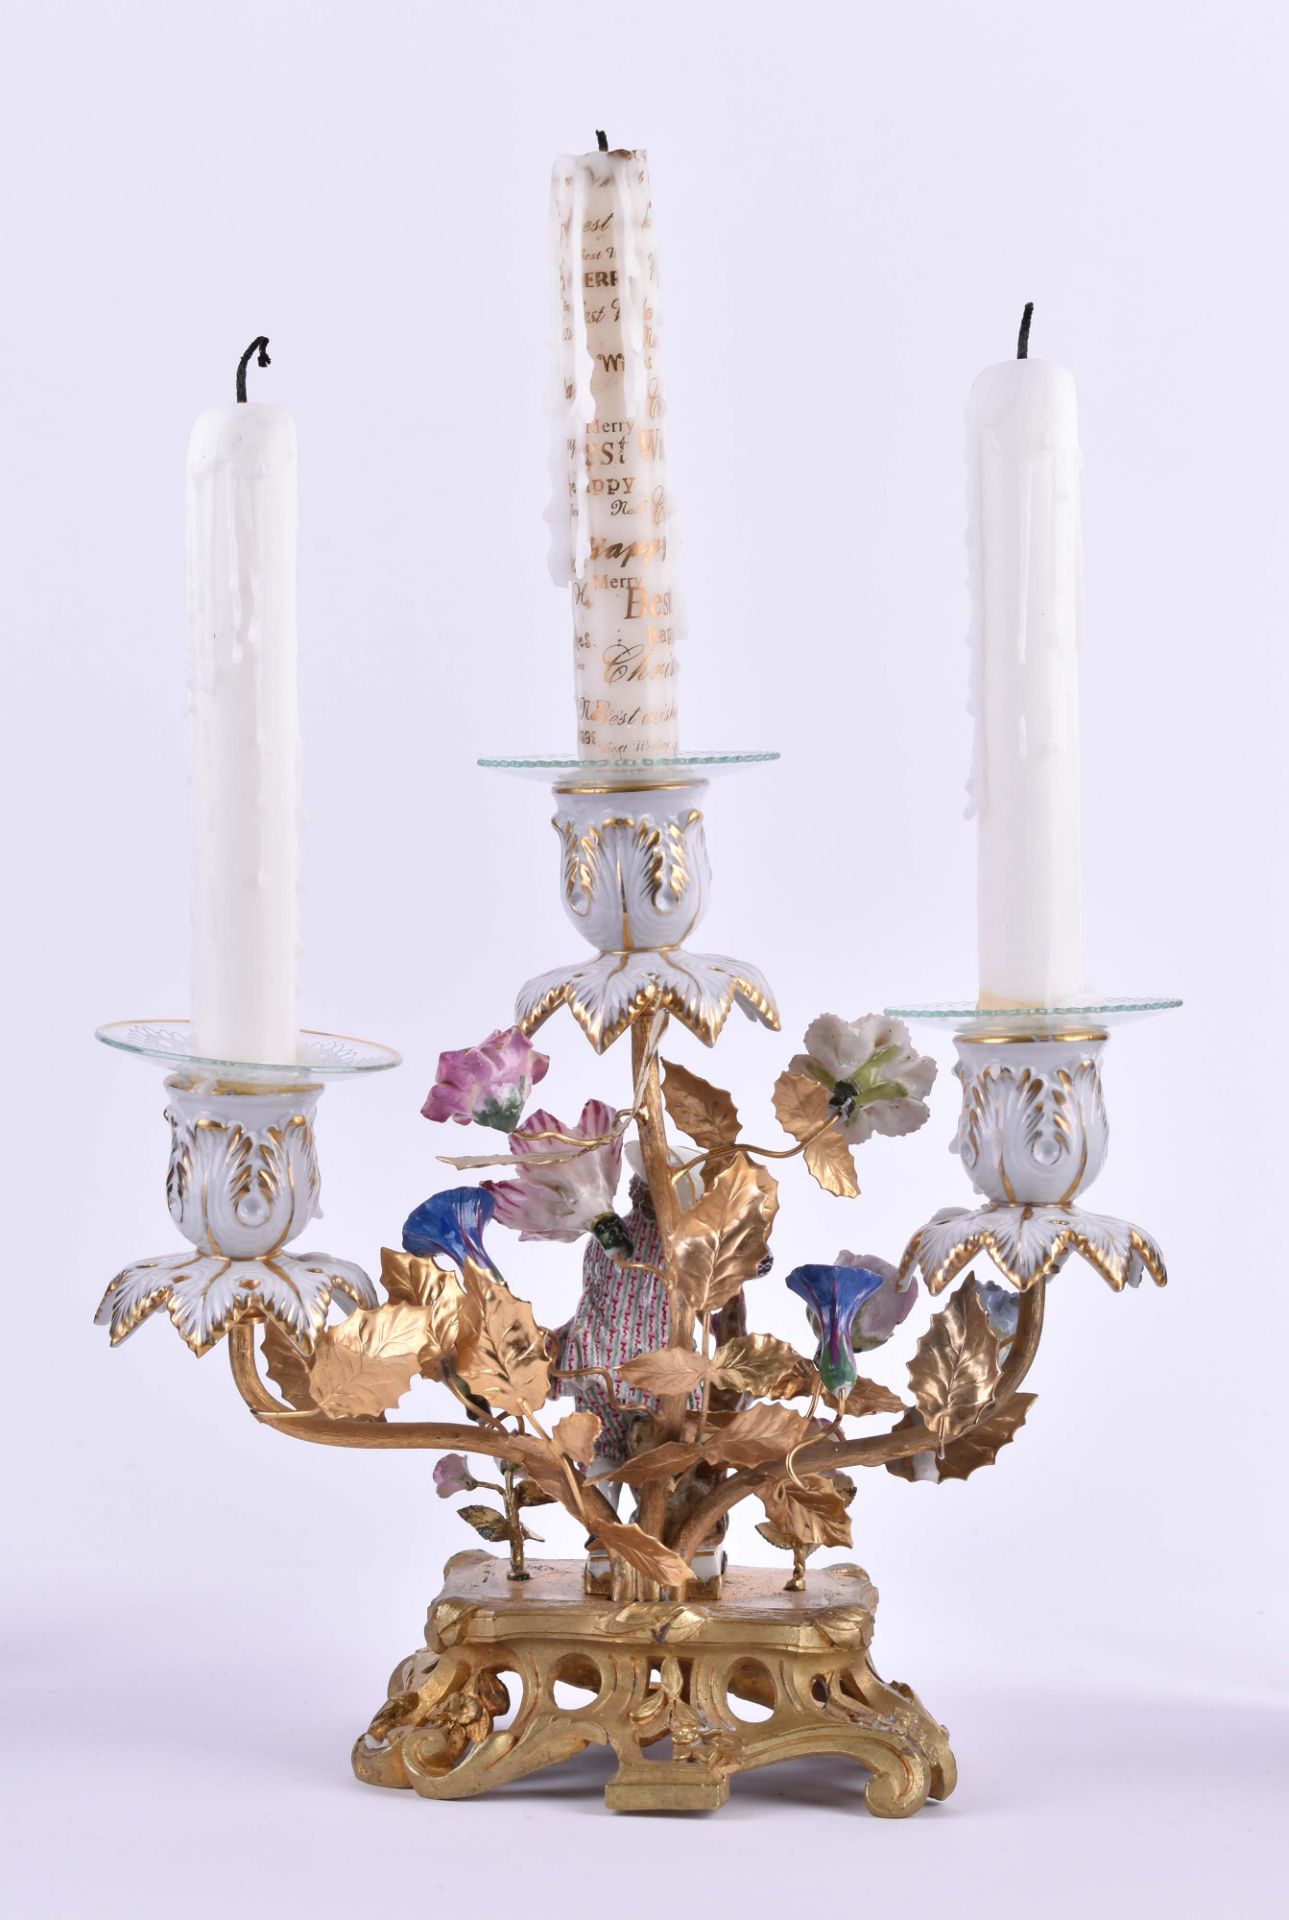  Candlestick Meissen 19th century - Image 3 of 6